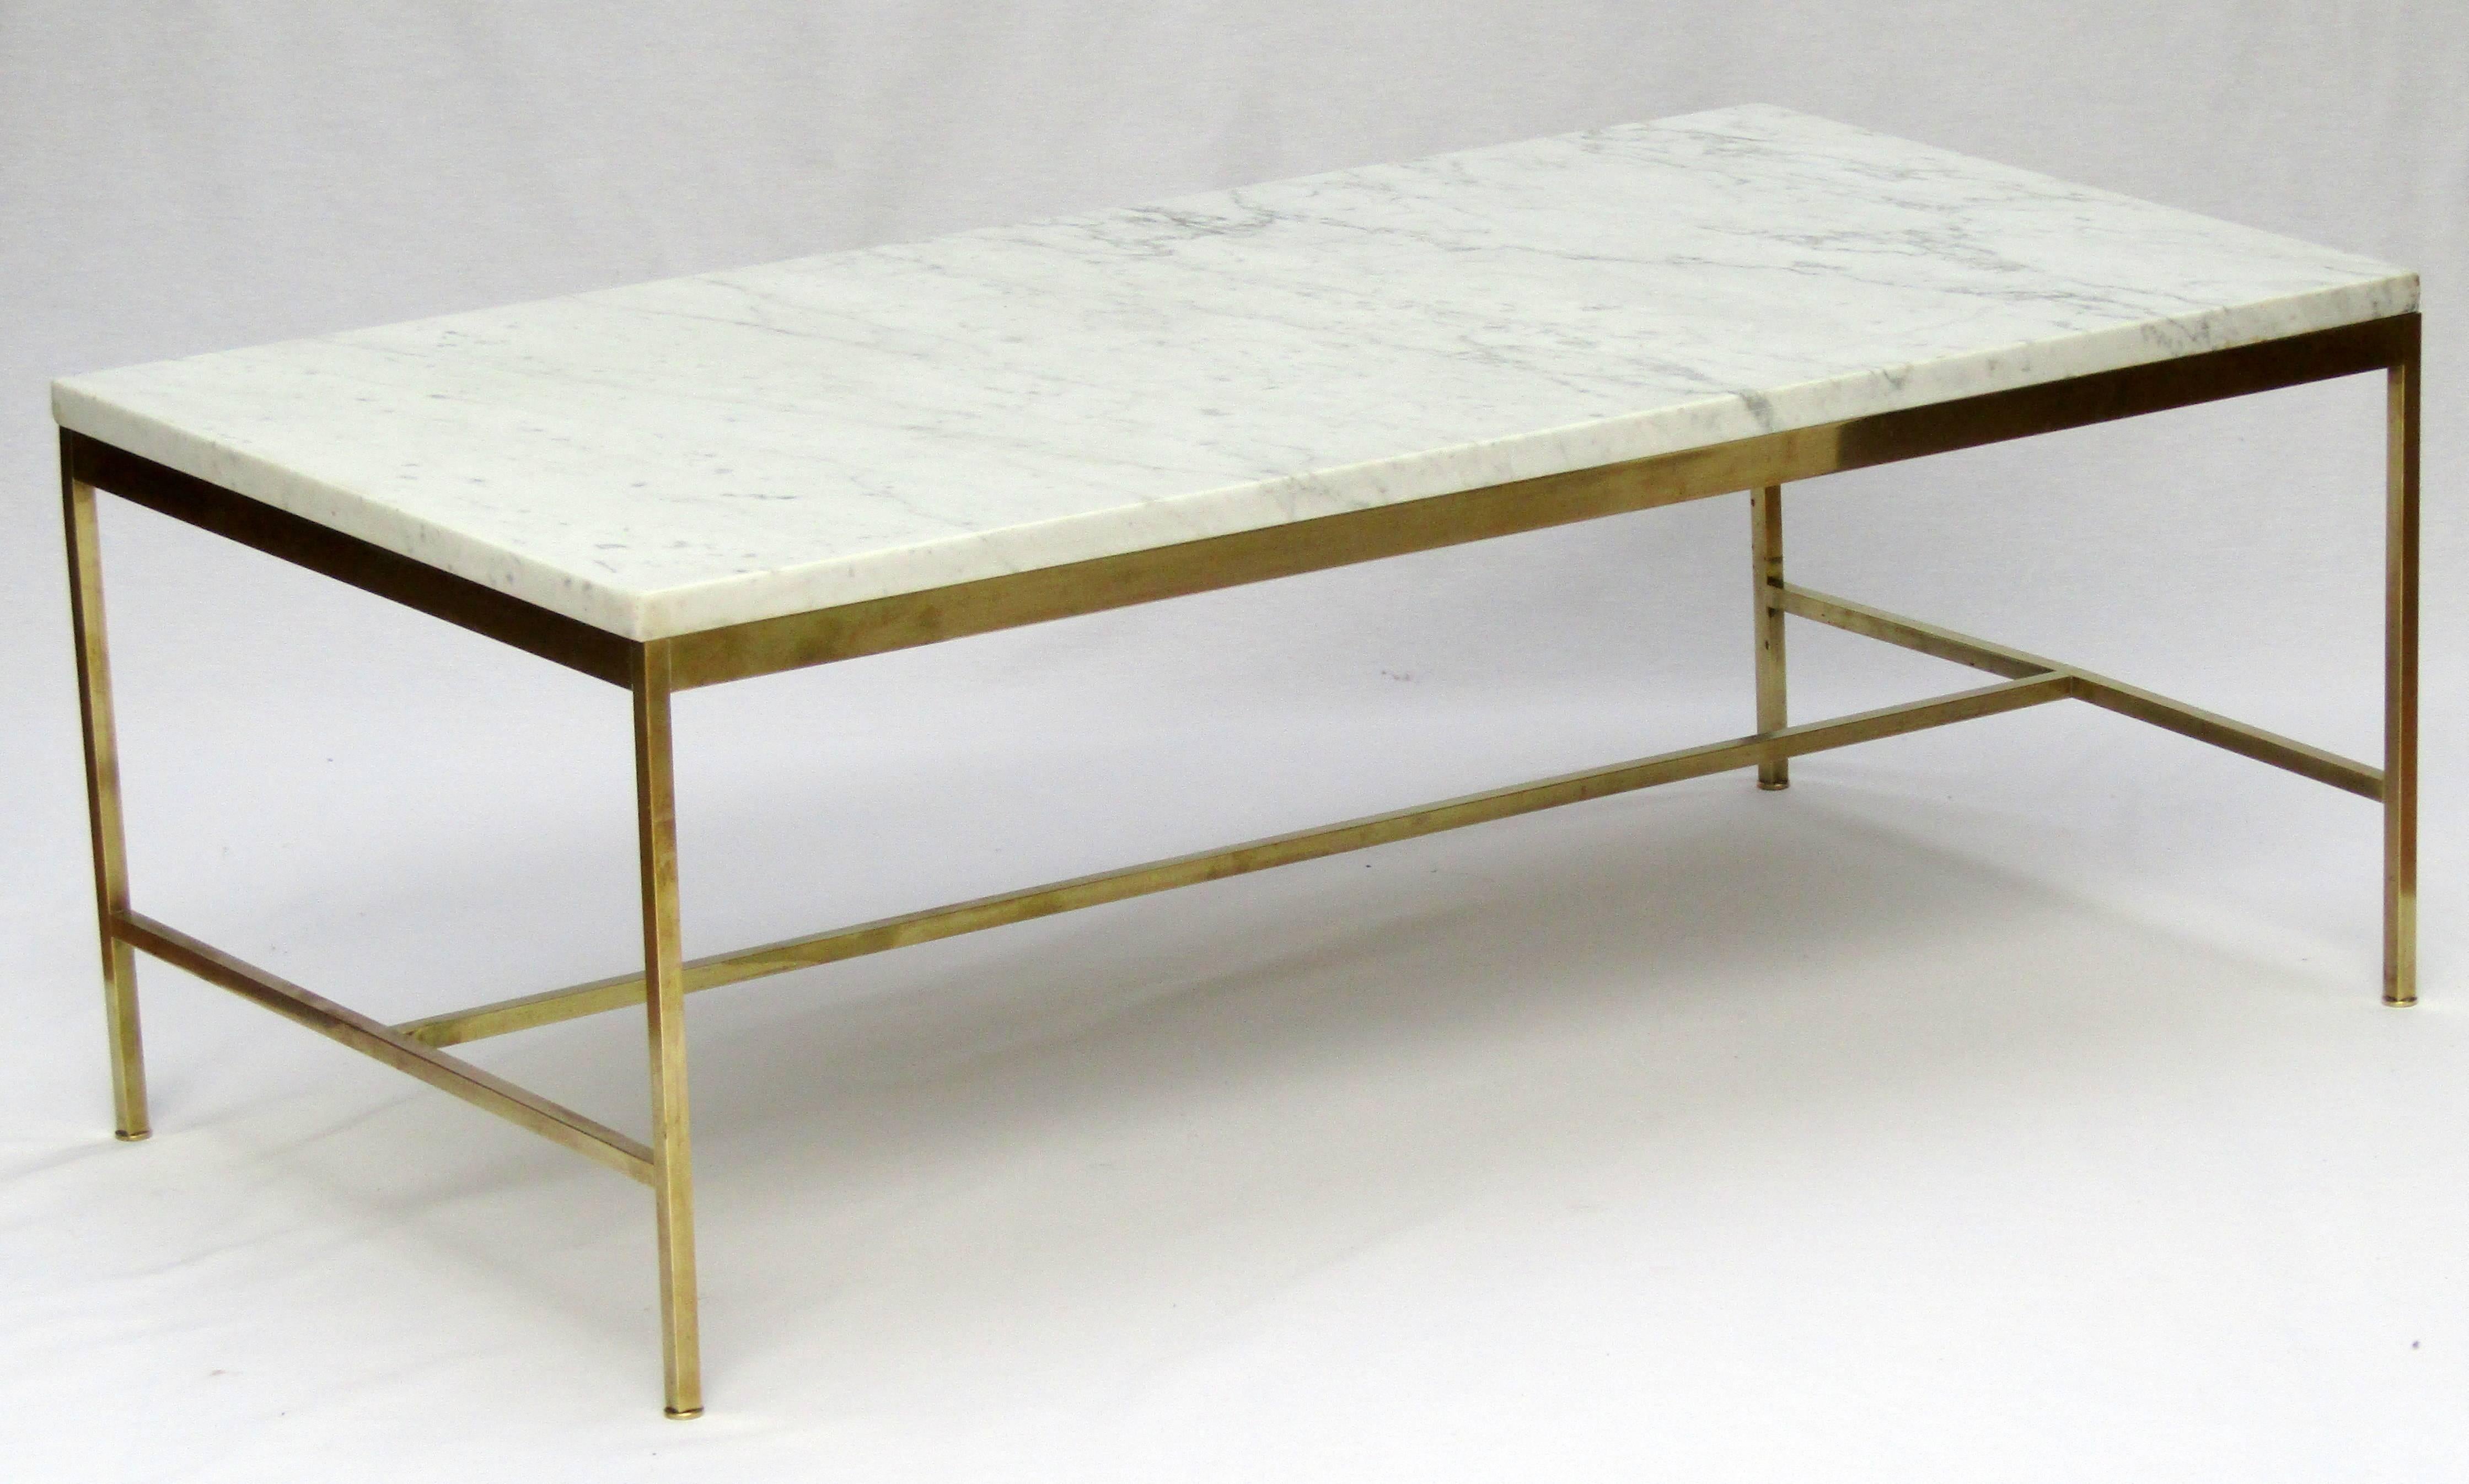 A white Carrara marble and brass coffee table
from the Directional Furniture Collection
designed by Paul McCobb.
    